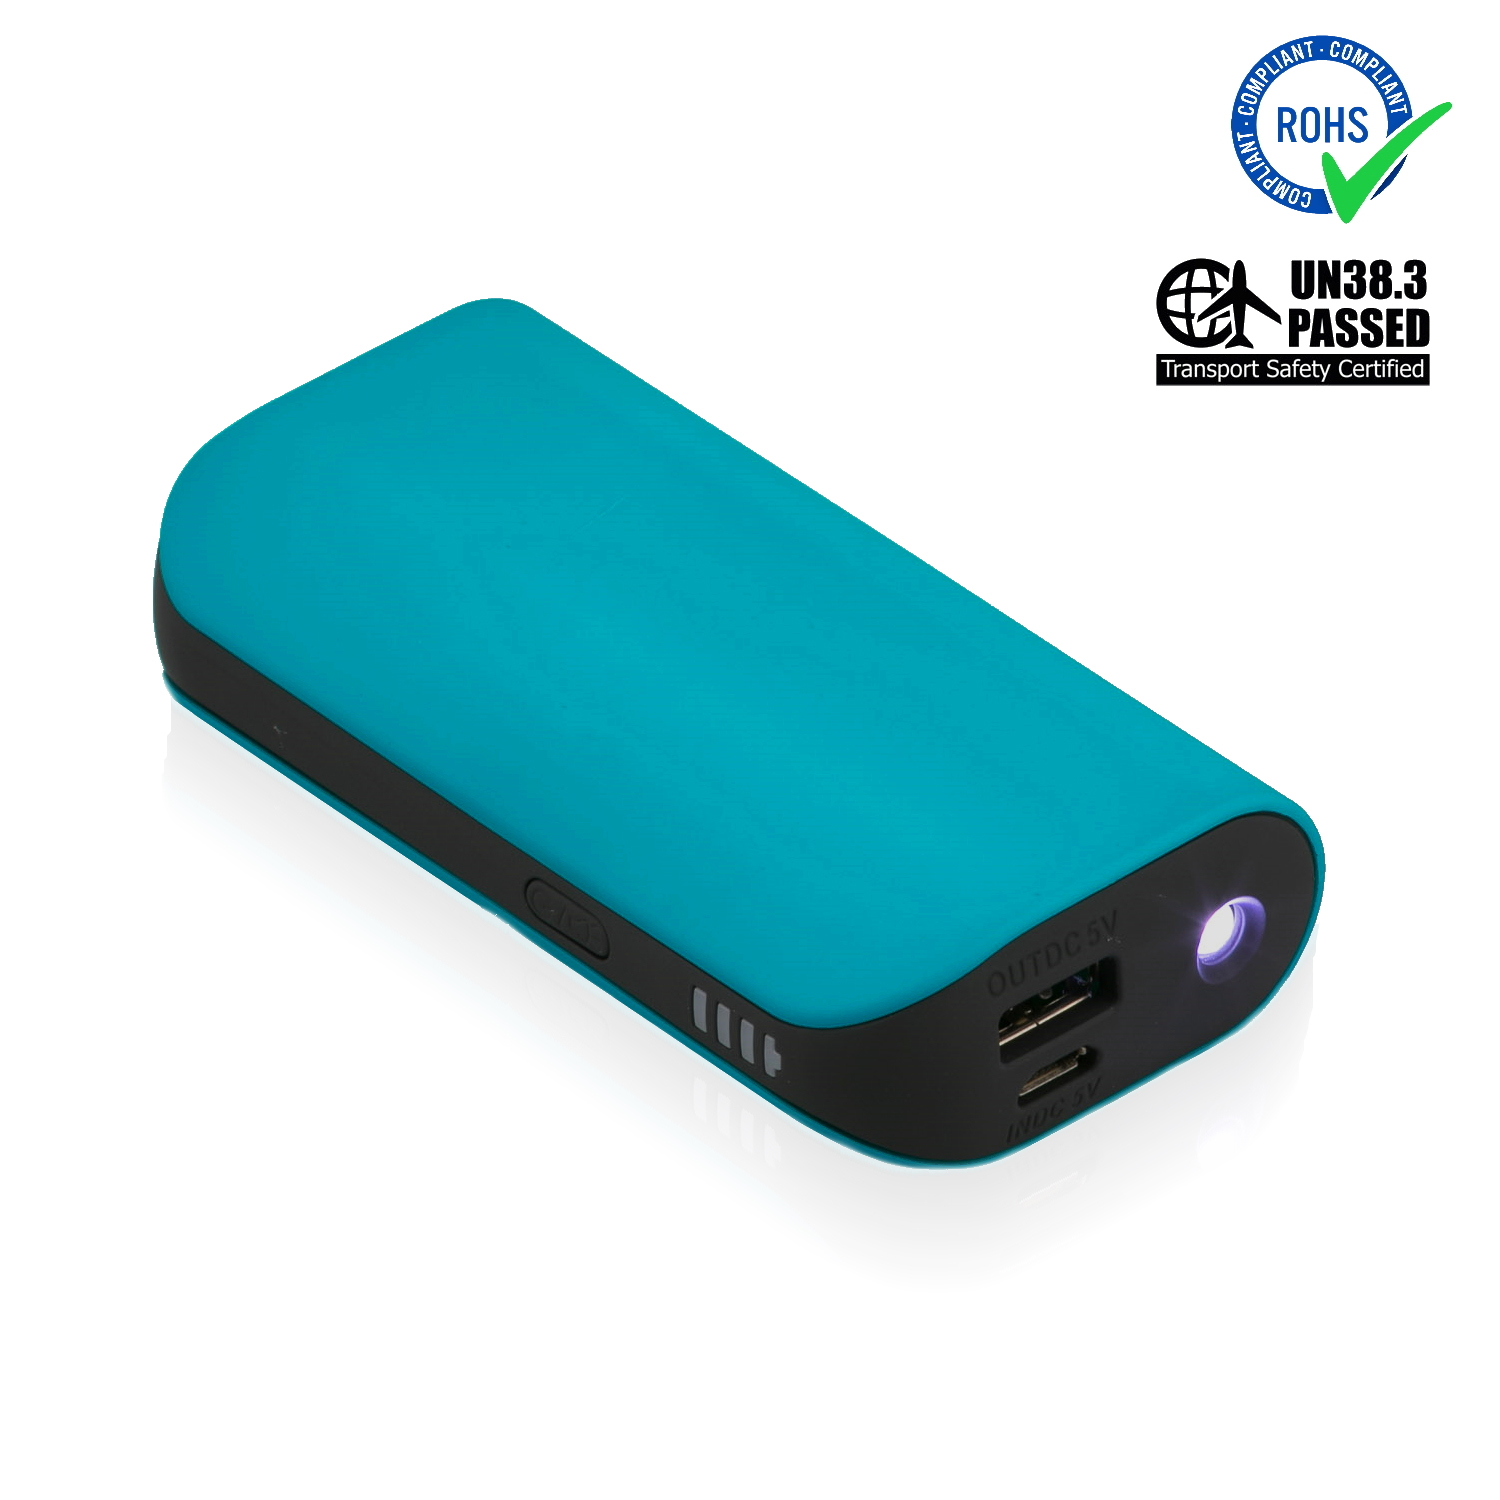 Turquoise Power Bank 5200 mAh + LED Torch 1